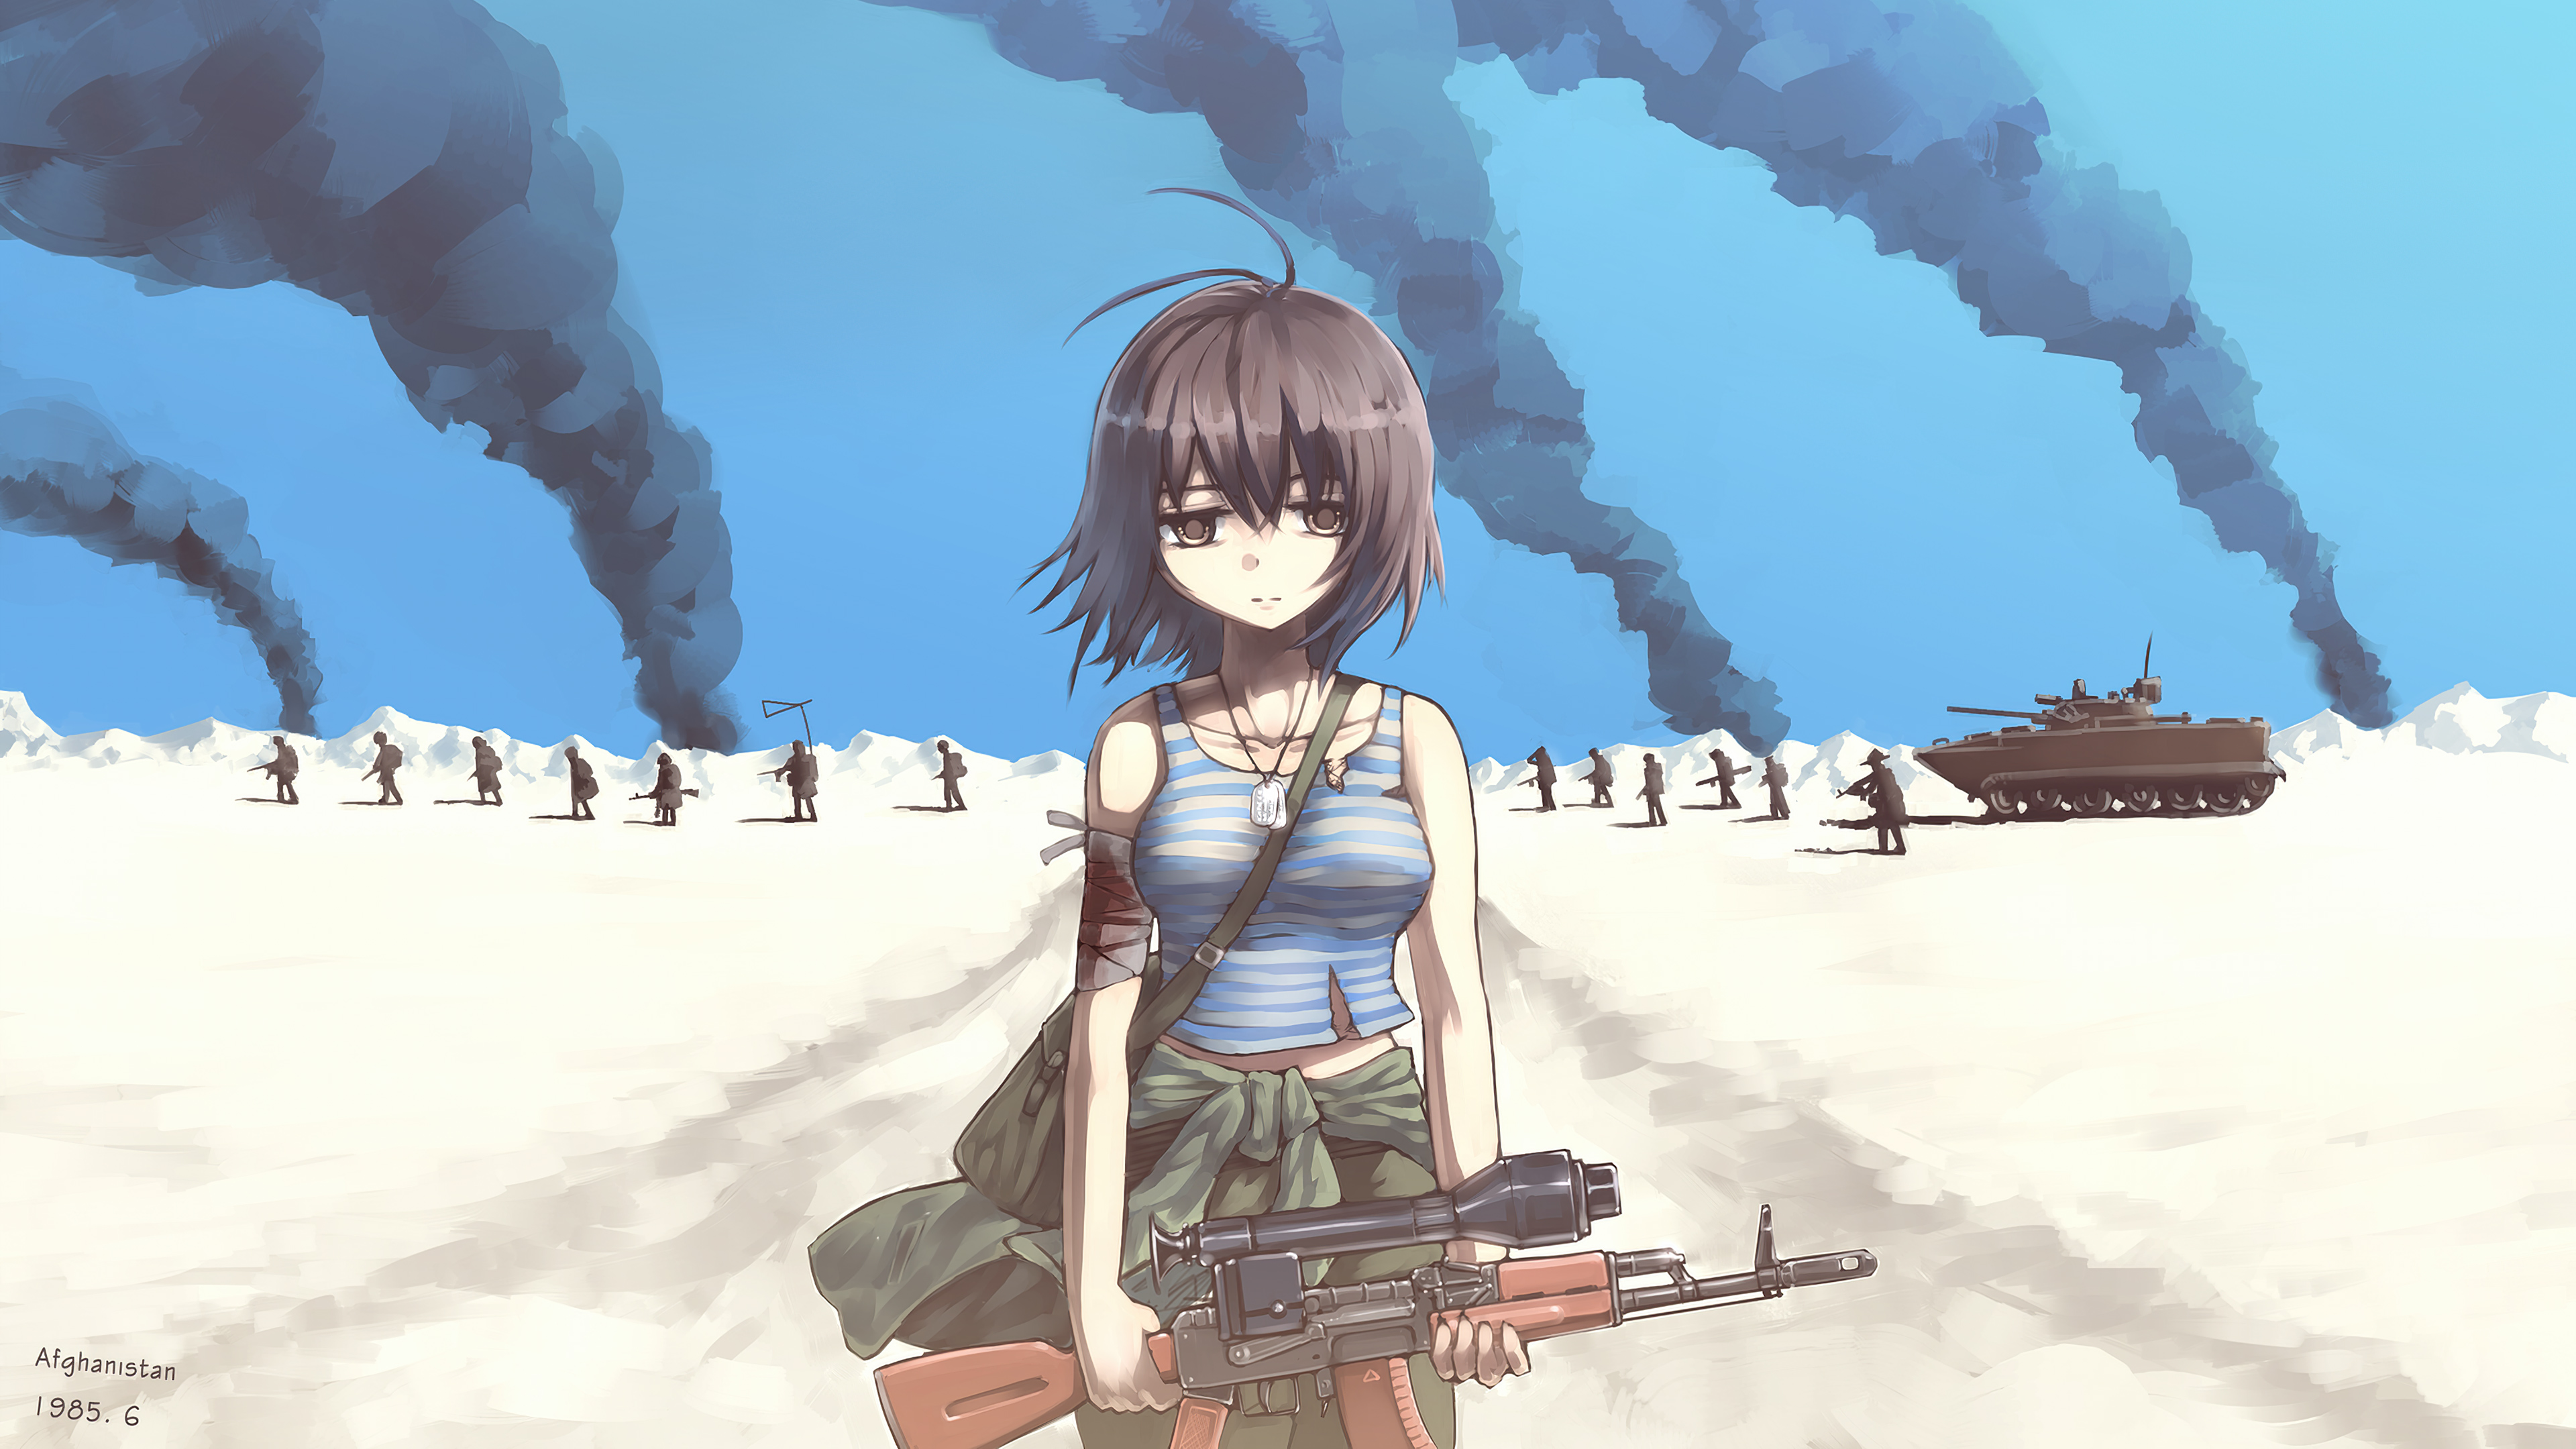 Anime girl with gun on war in afghanistan k hd anime k wallpapers images backgrounds photos and pictures